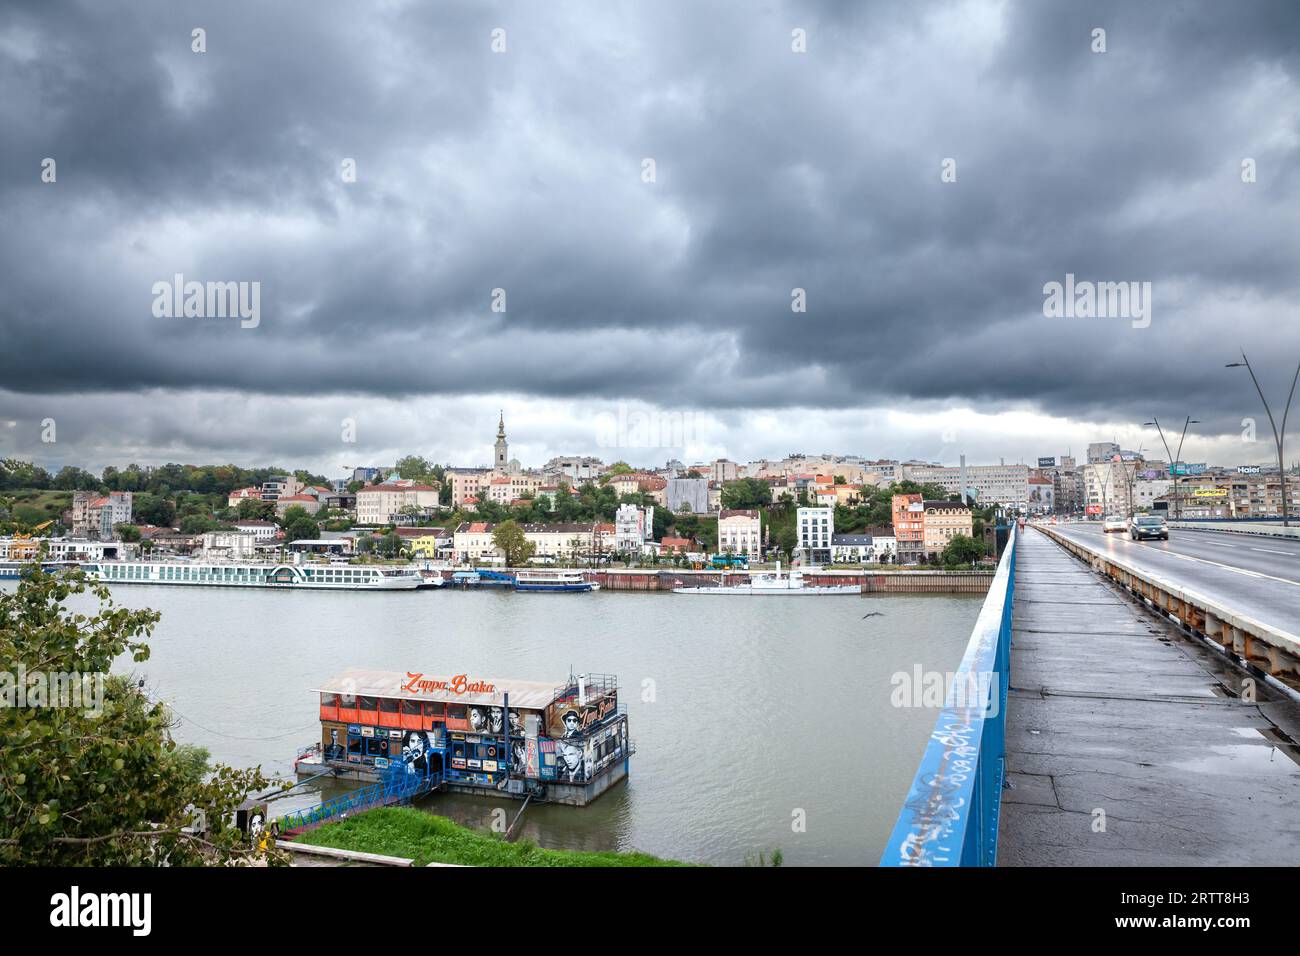 Picture of Sava river in Belgrade, capital city of Serbia, with Brankov most bridge crossing the river and the iconic district of stari grad old town. Stock Photo